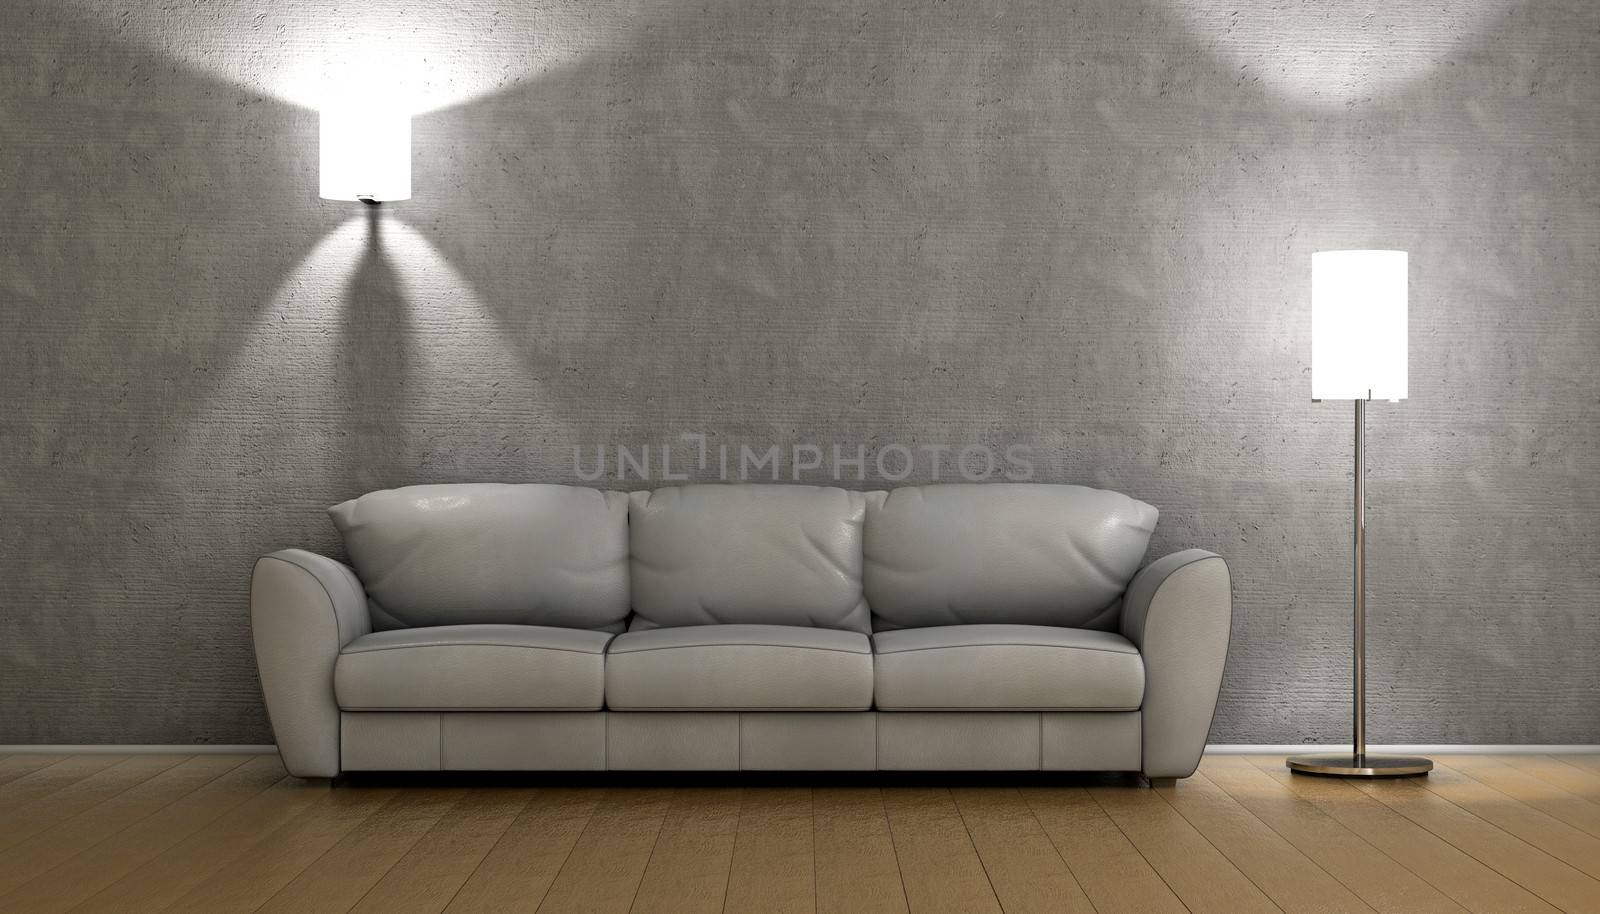 Sofa on a room with two light source